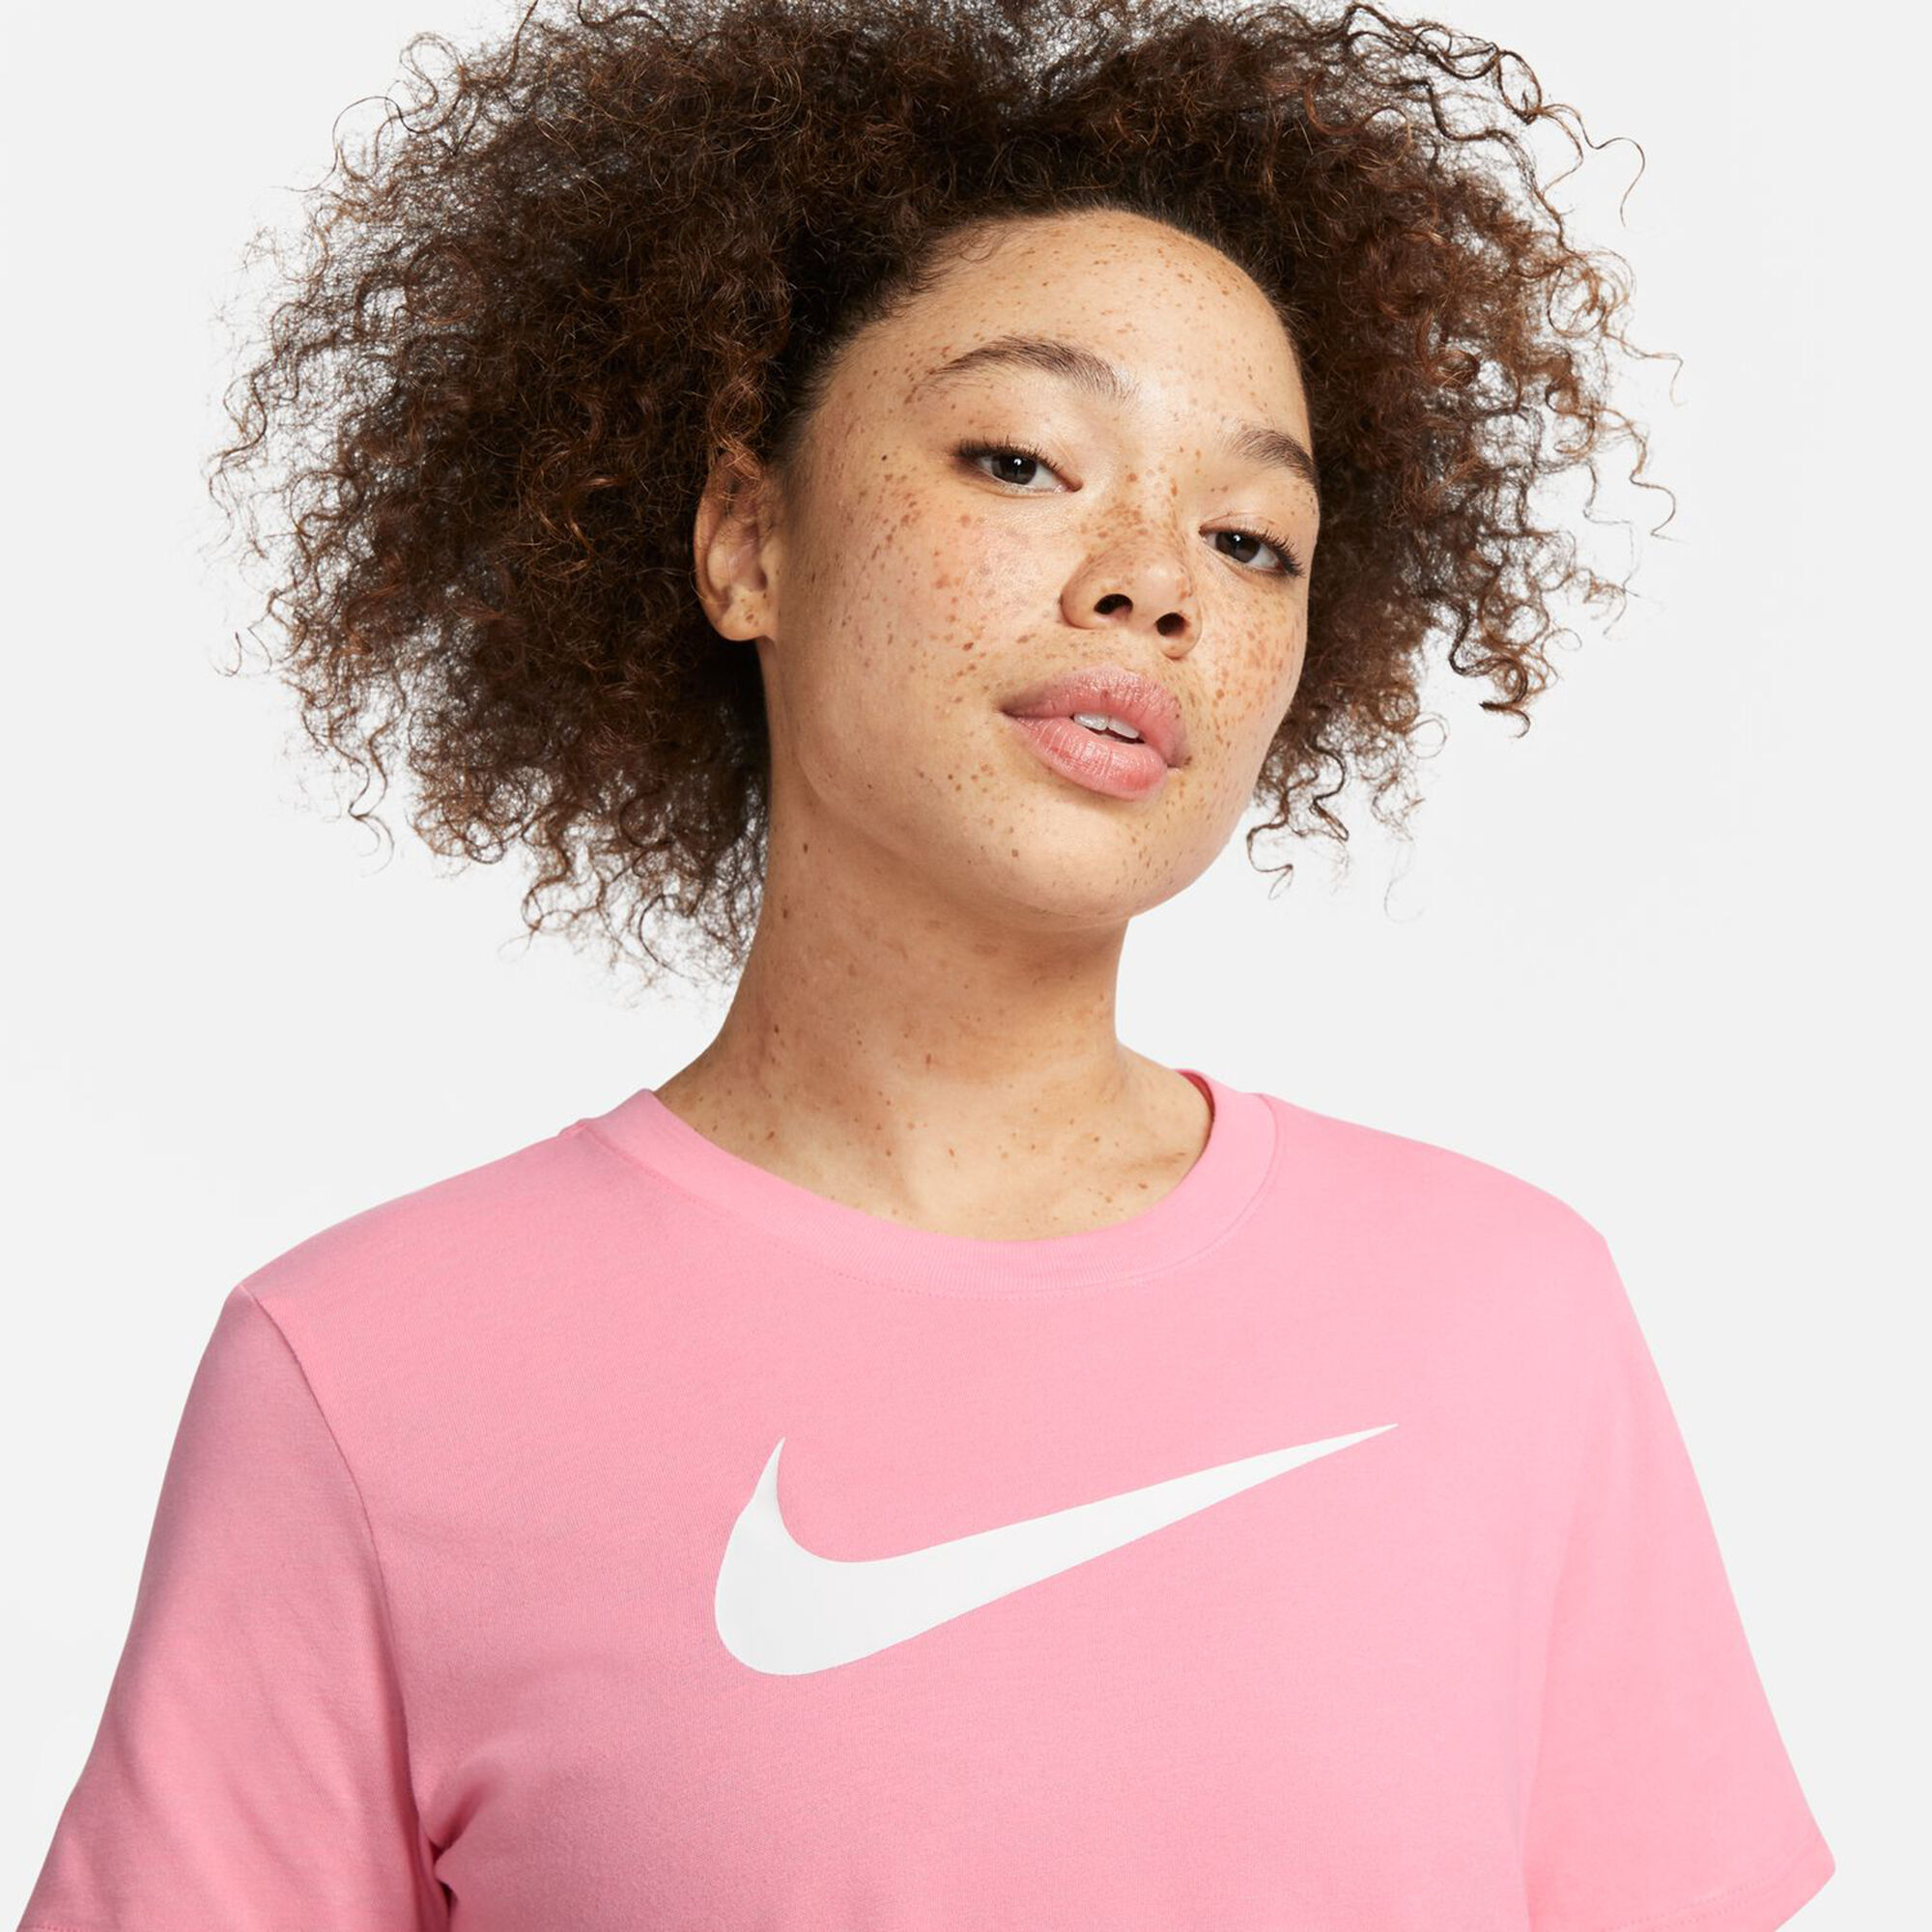 Maillot manches courtes Femme Nike Dri-Fit Swoosh Rose